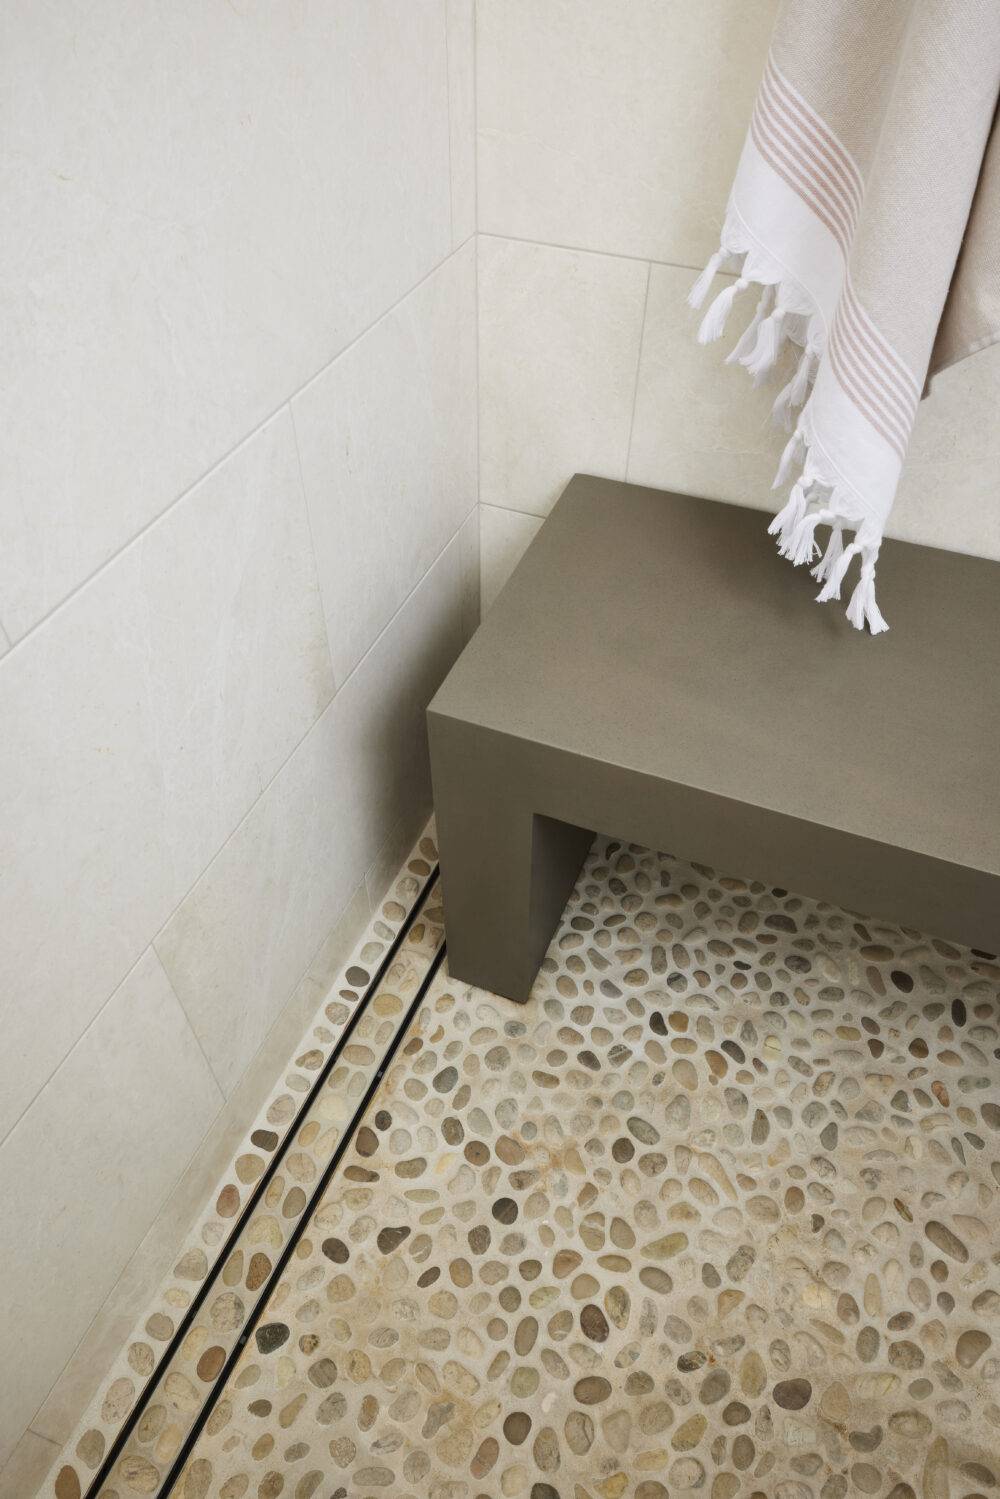 Corner shot of a shower with grey bench and pebble tile floor.